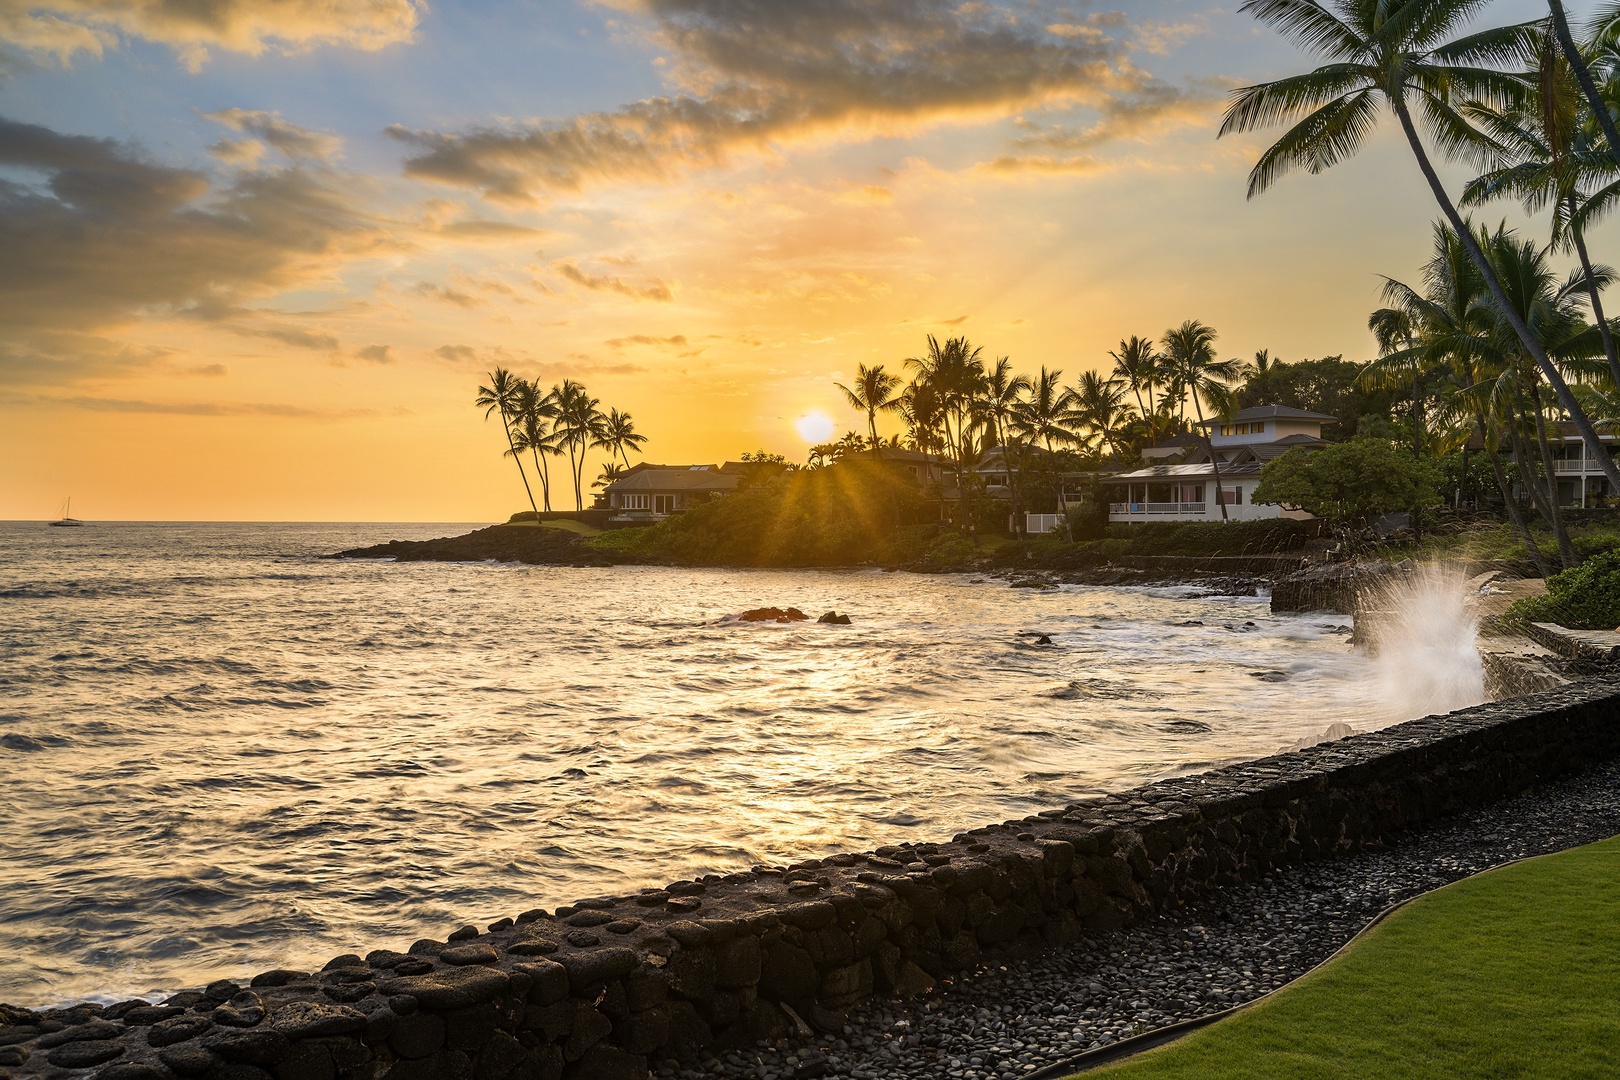 Kailua Kona Vacation Rentals, Hale Pua - The sea wall separating the back yard from miles and miles of ocean blue